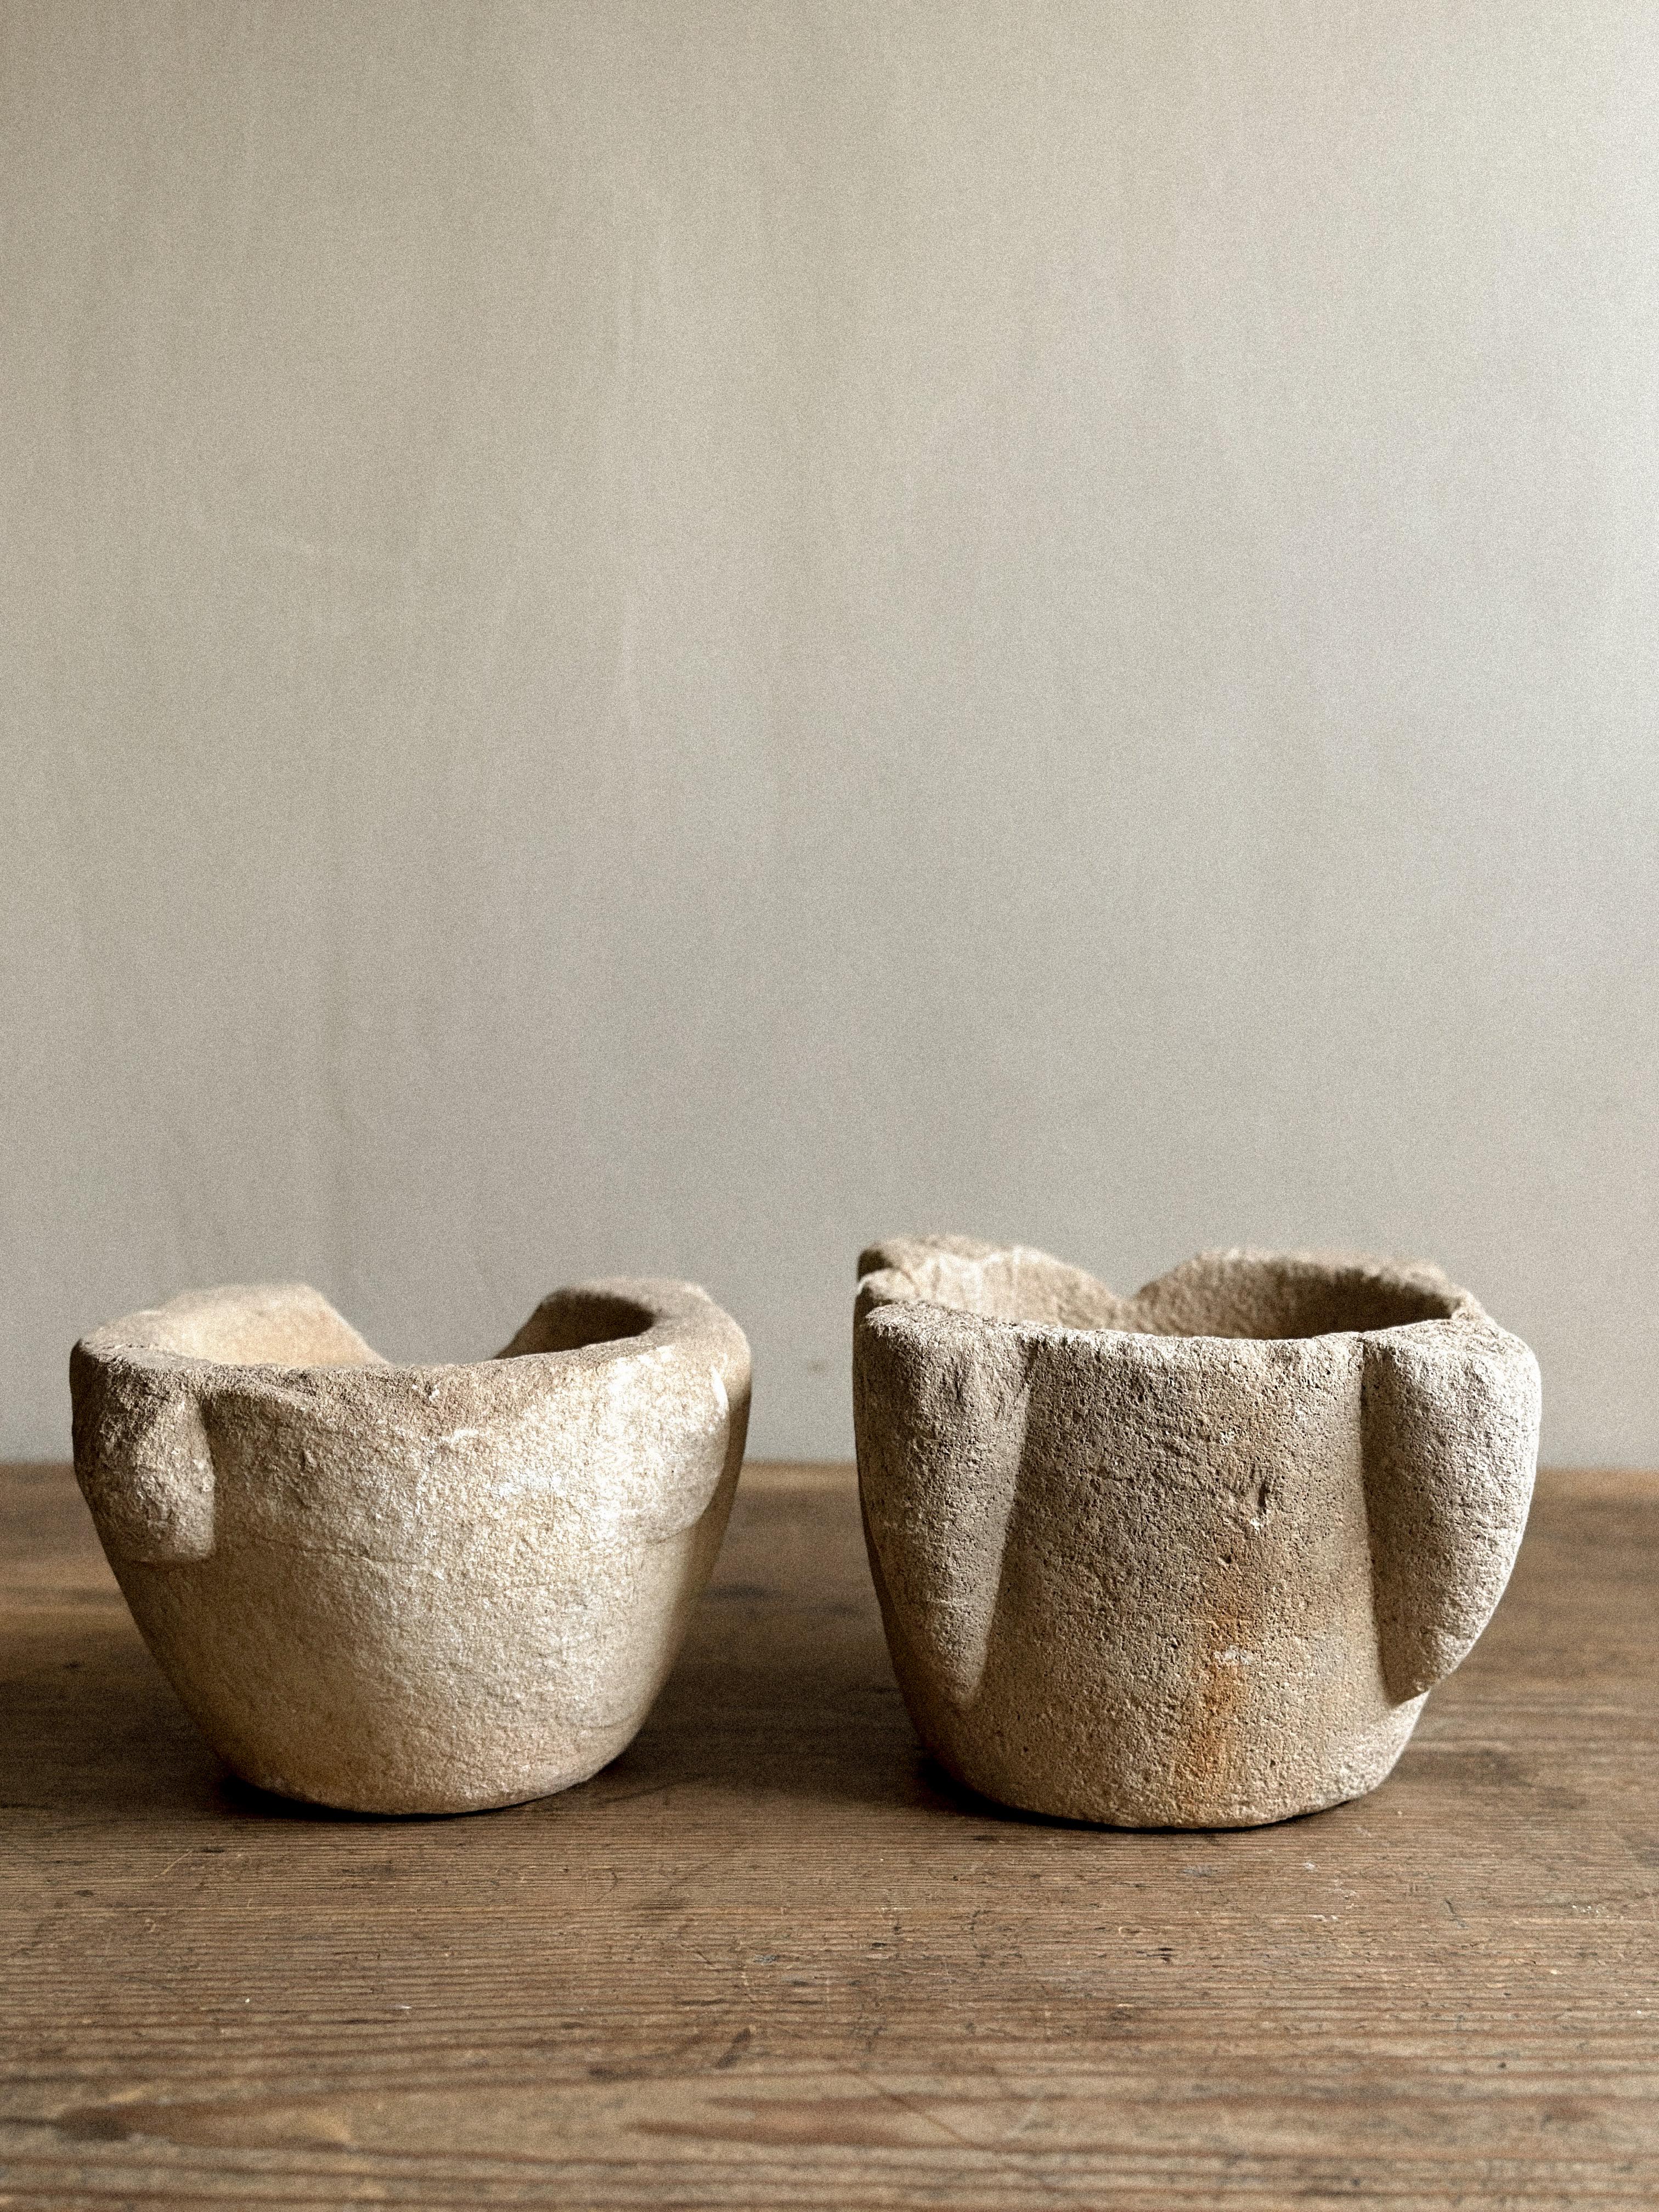 A Duo of Primitive Wabi Sabi Hand-Carved Stone Mortars, Spain, Early 1900s For Sale 2